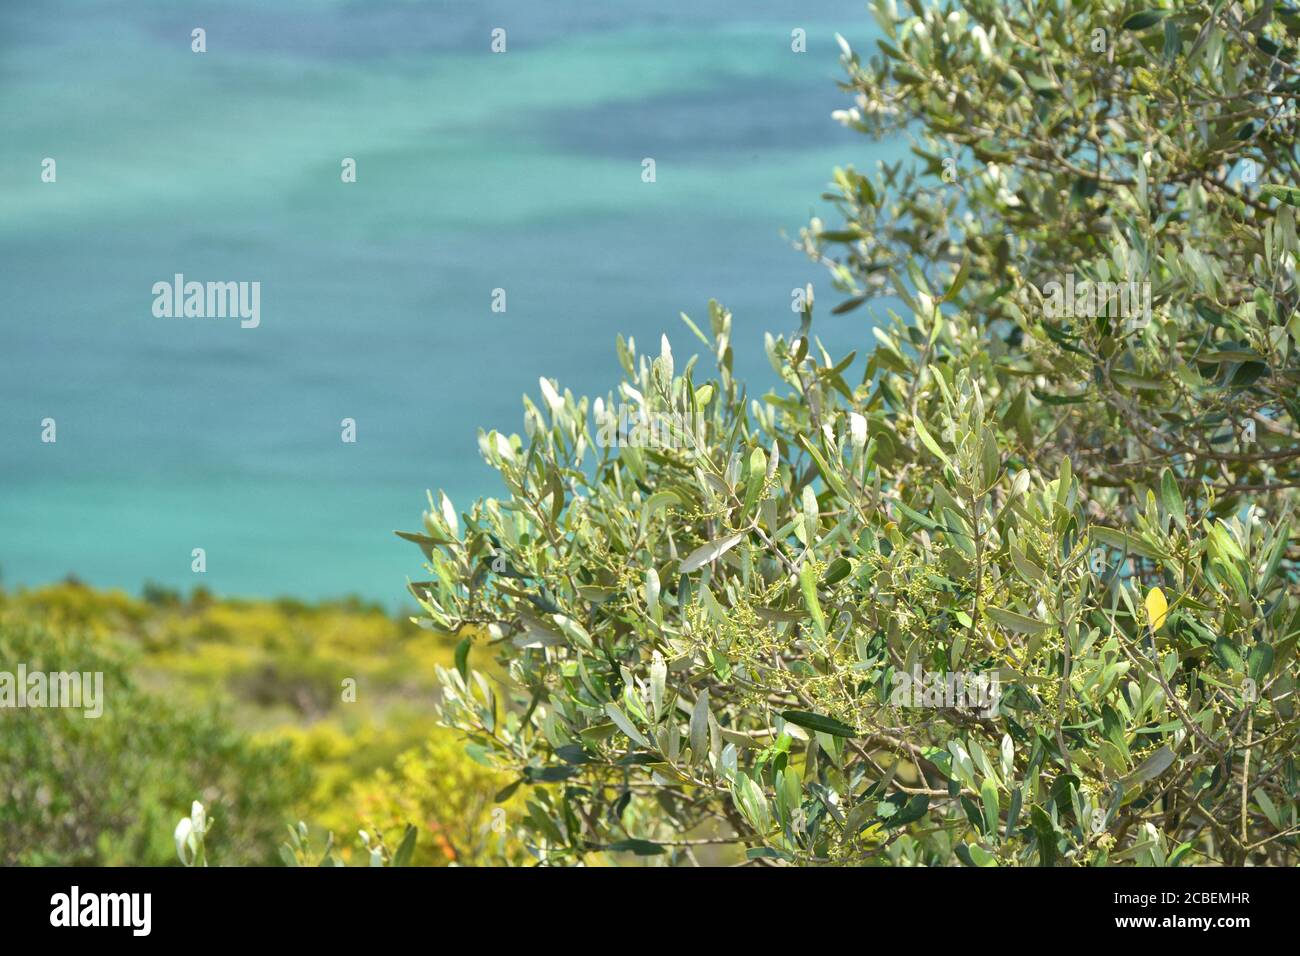 Olive tree branches with buds growing in Portugal. Waters of Atlantic ocean in the background. Stock Photo